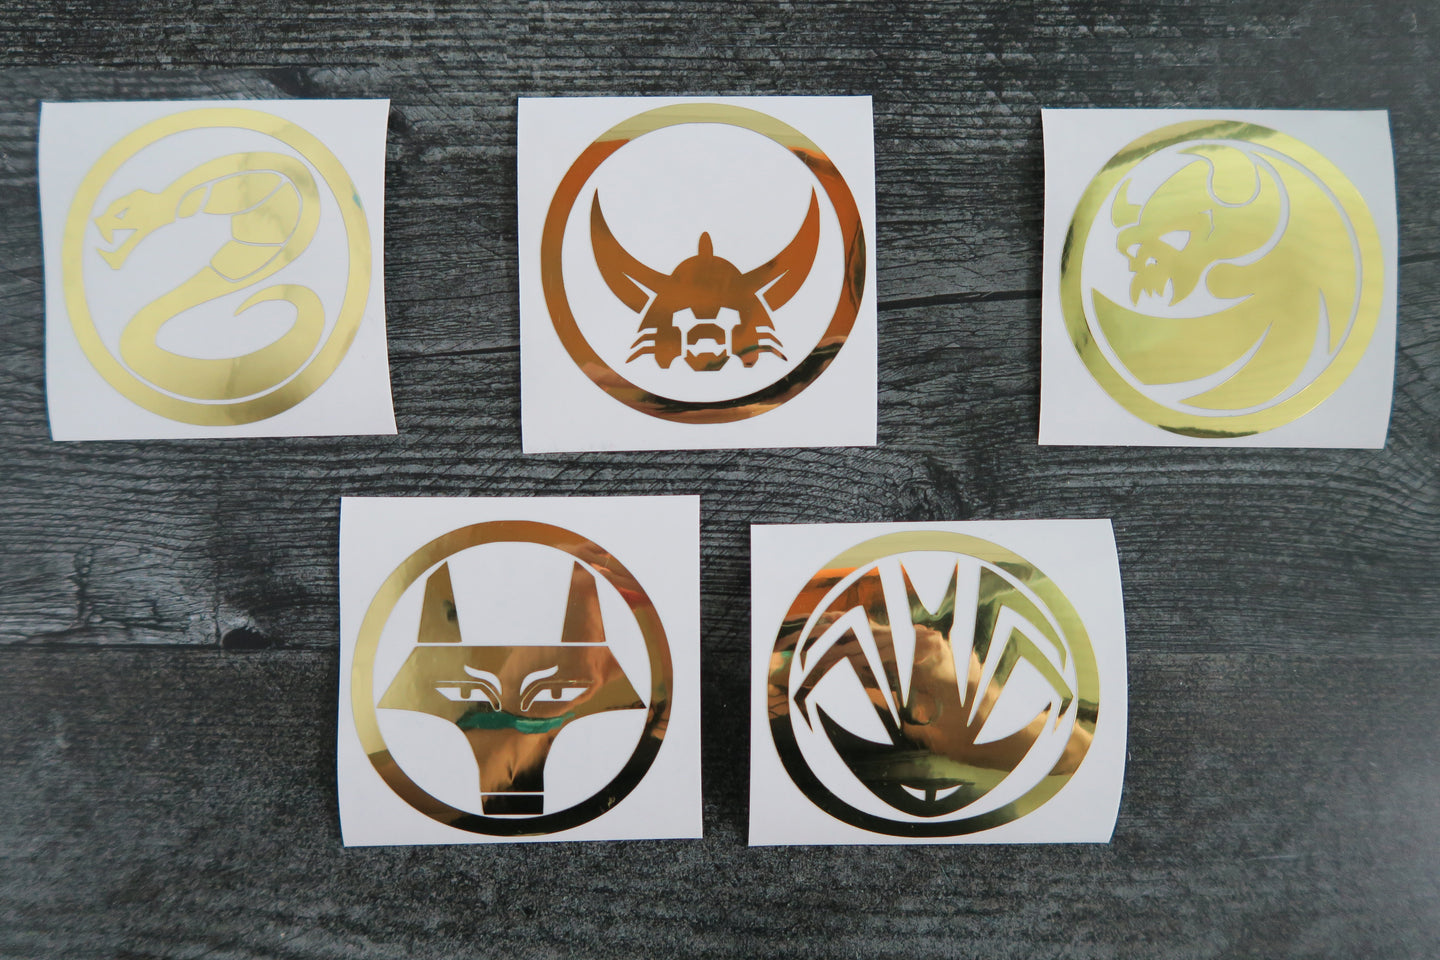 SET of 5 - Warlords Armor - Decals/Stickers